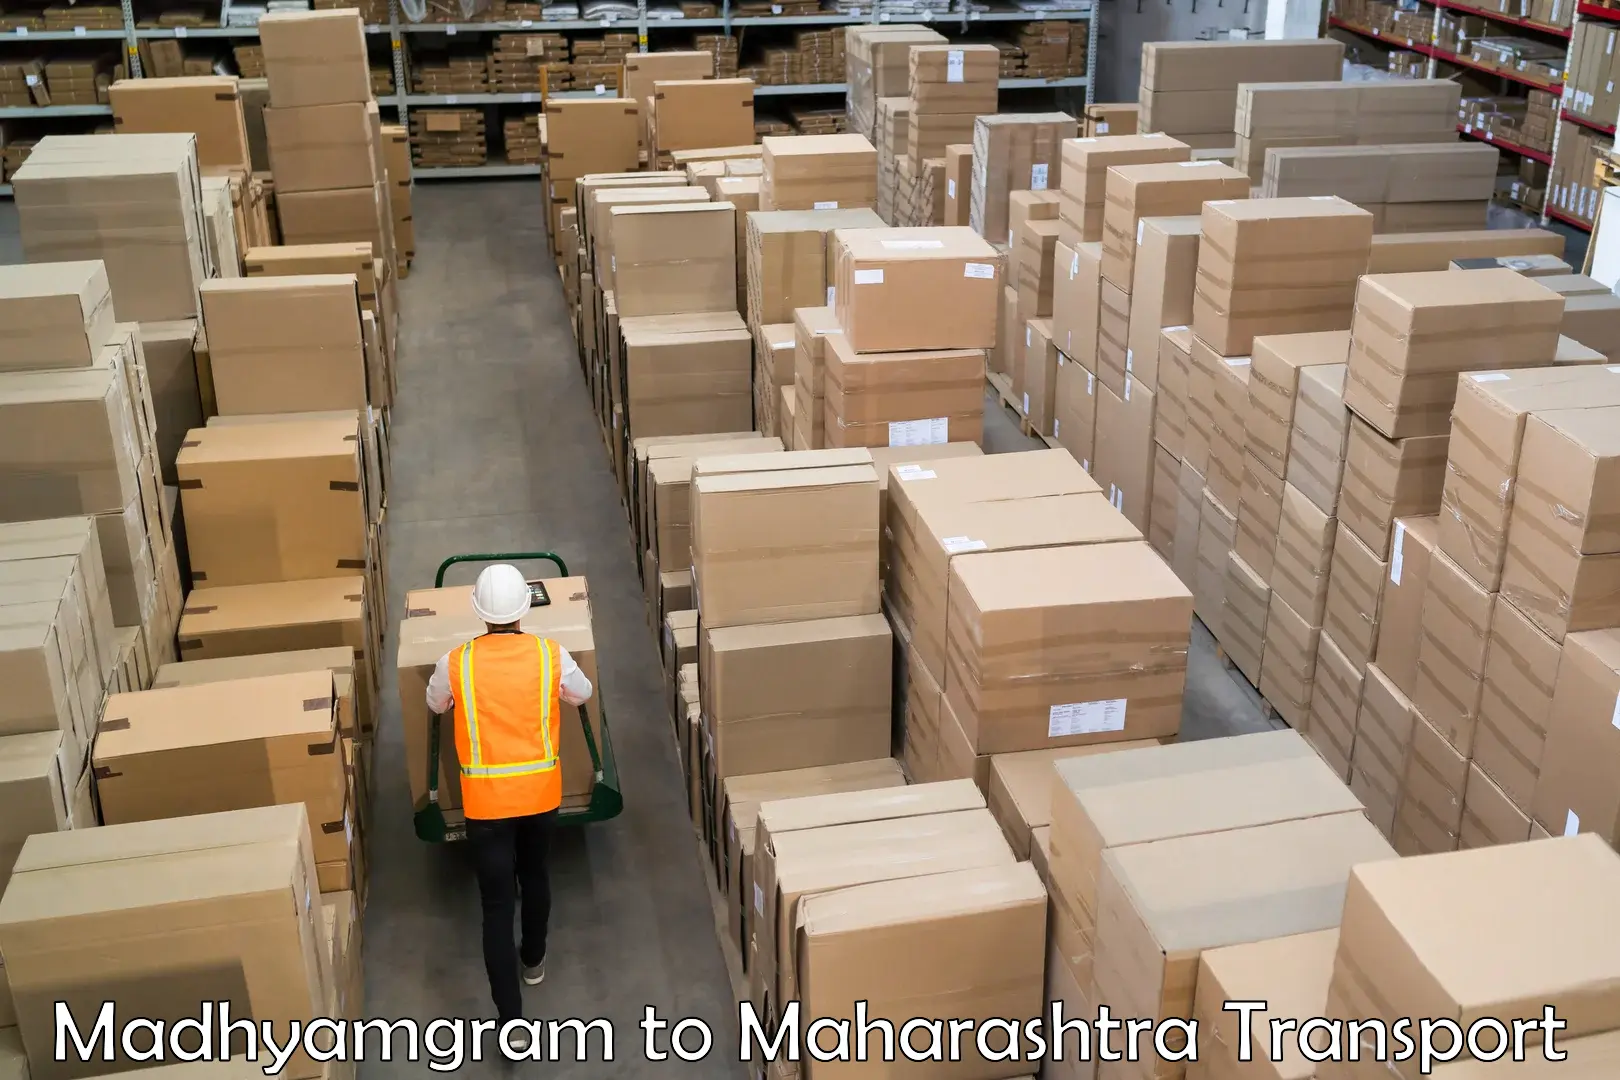 Express transport services Madhyamgram to Symbiosis International Pune